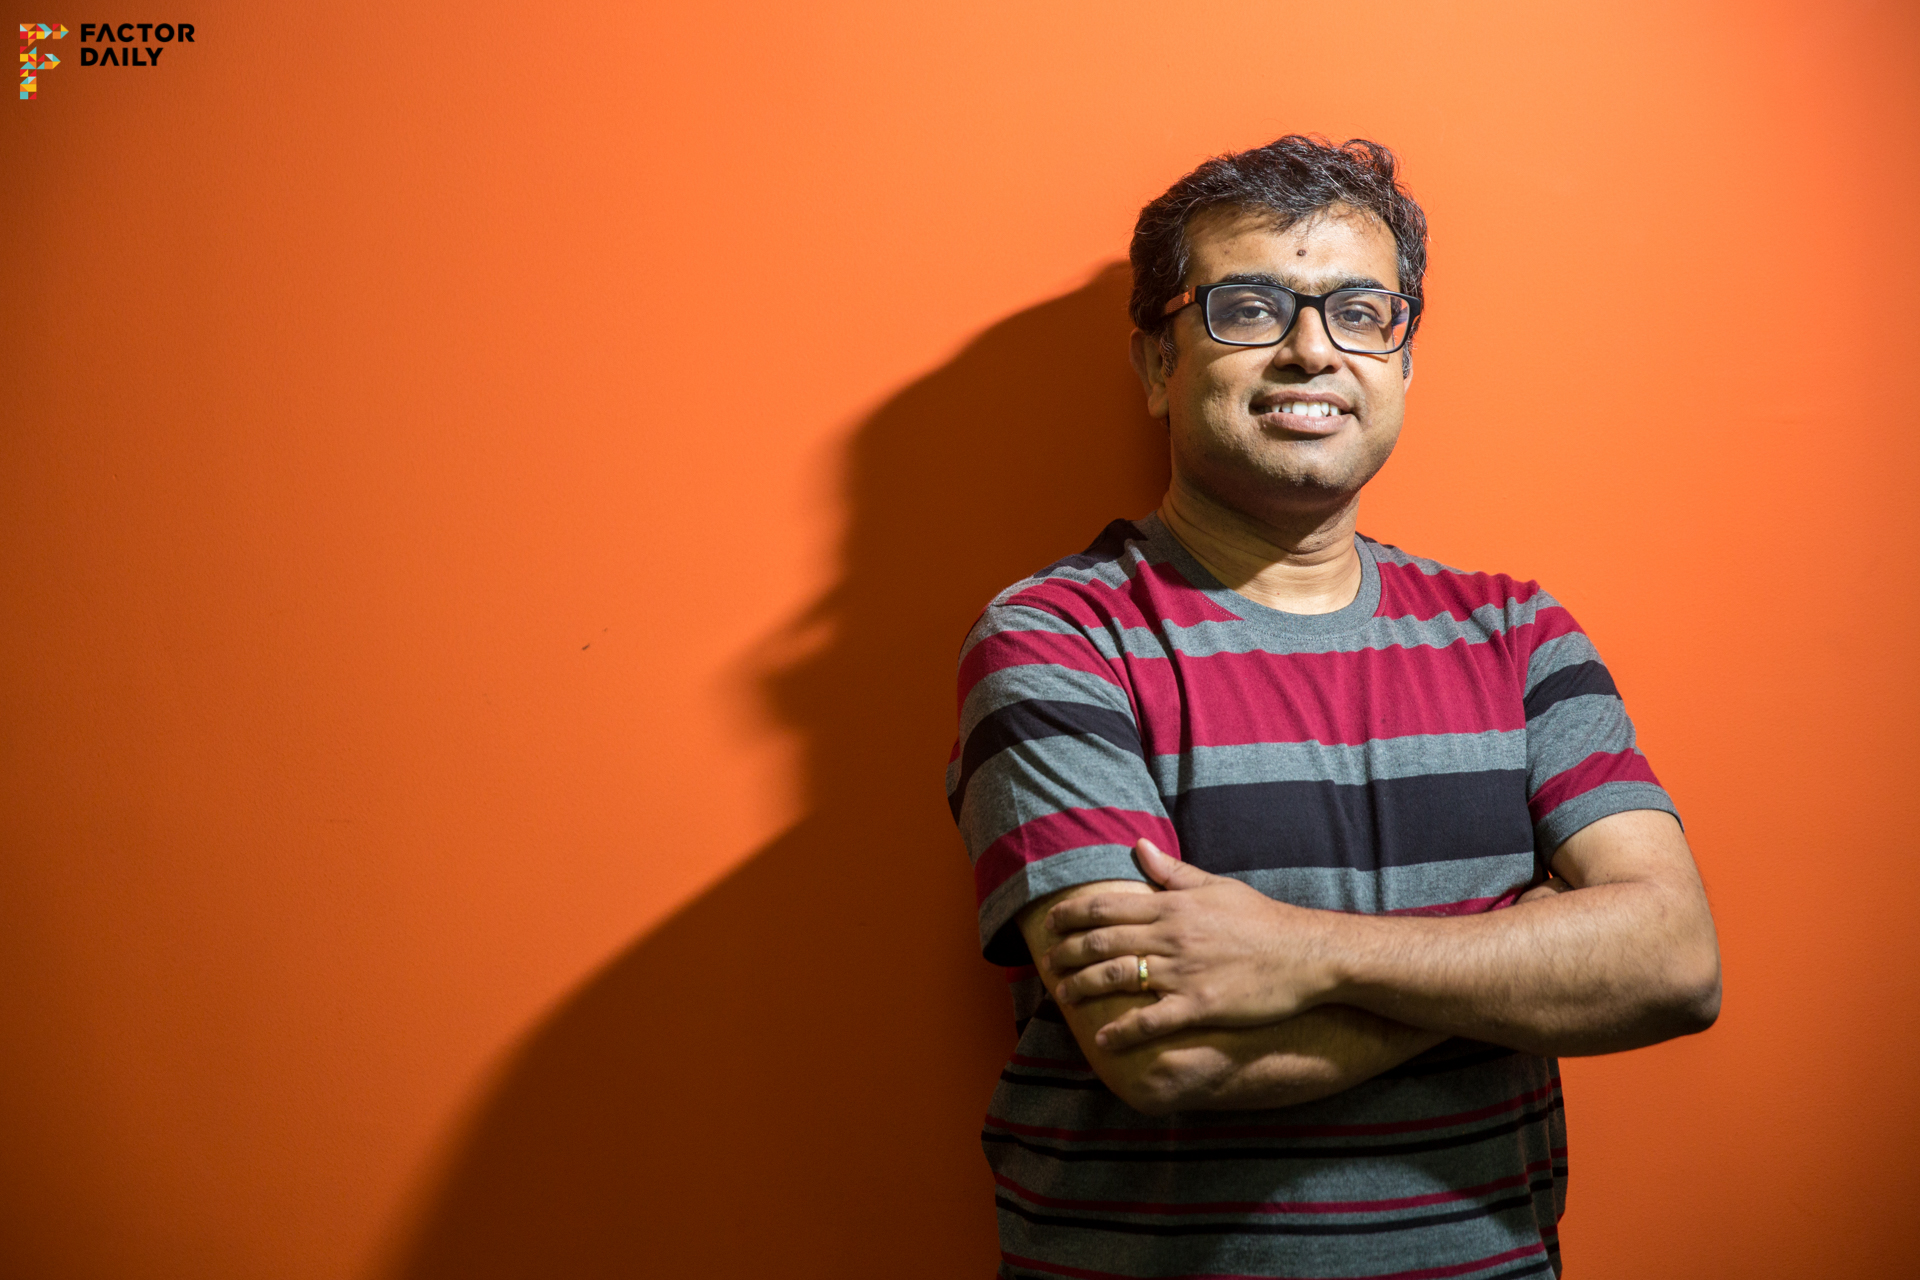 Surojit Chatterjee, a former Googler who now heads products at Flipkart takes out a few minutes to pose for a picture. Photo: Rajesh Subramanian. Location: Flipkart office, Bangalore.